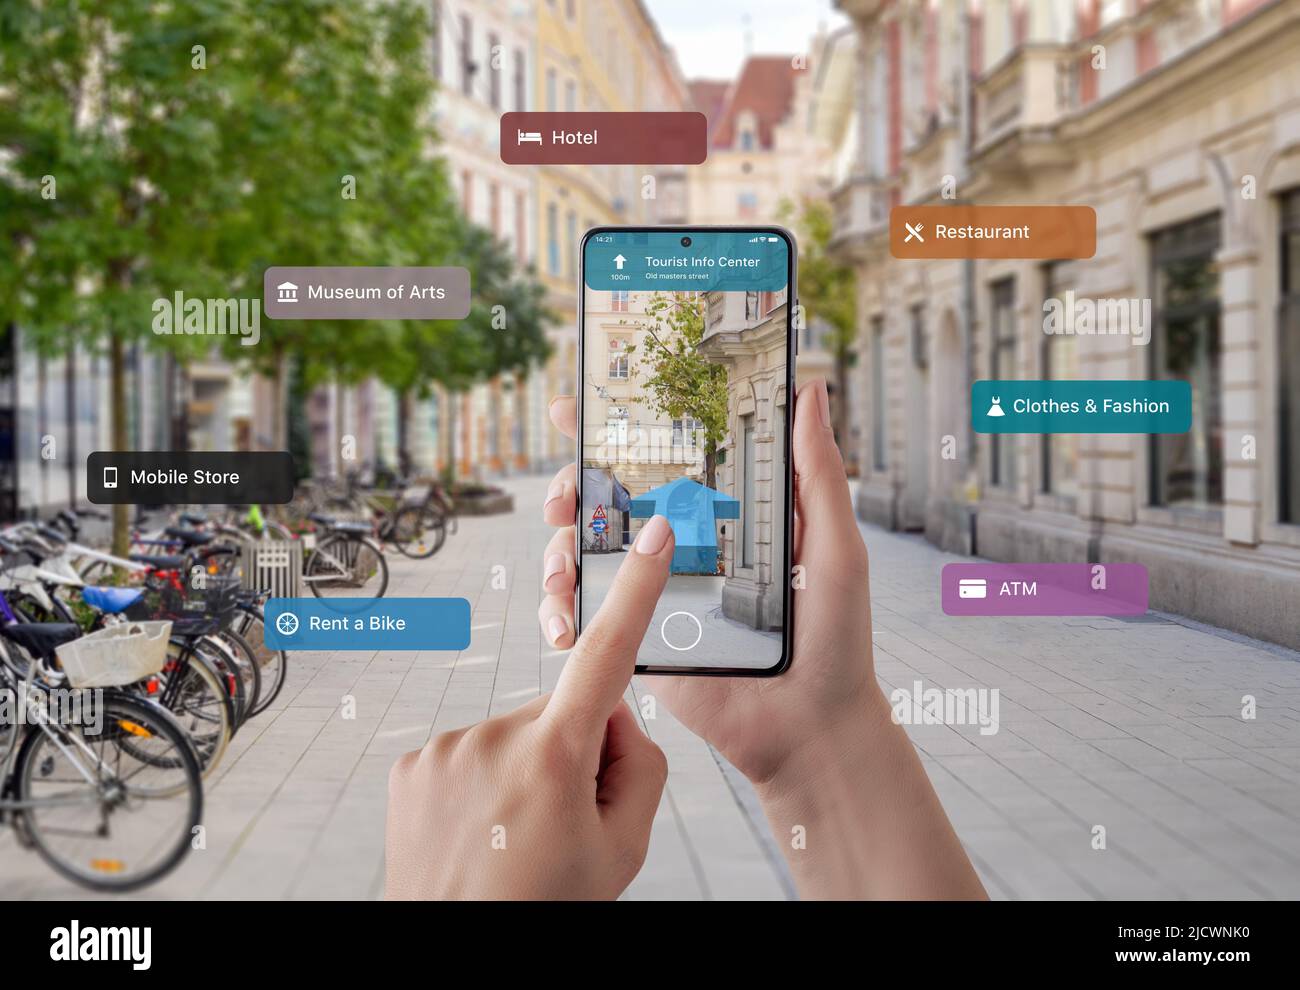 Tourist information and signposts on smart phone in tourist hands. The concept of using augmented reality apps and technology in tourism Stock Photo